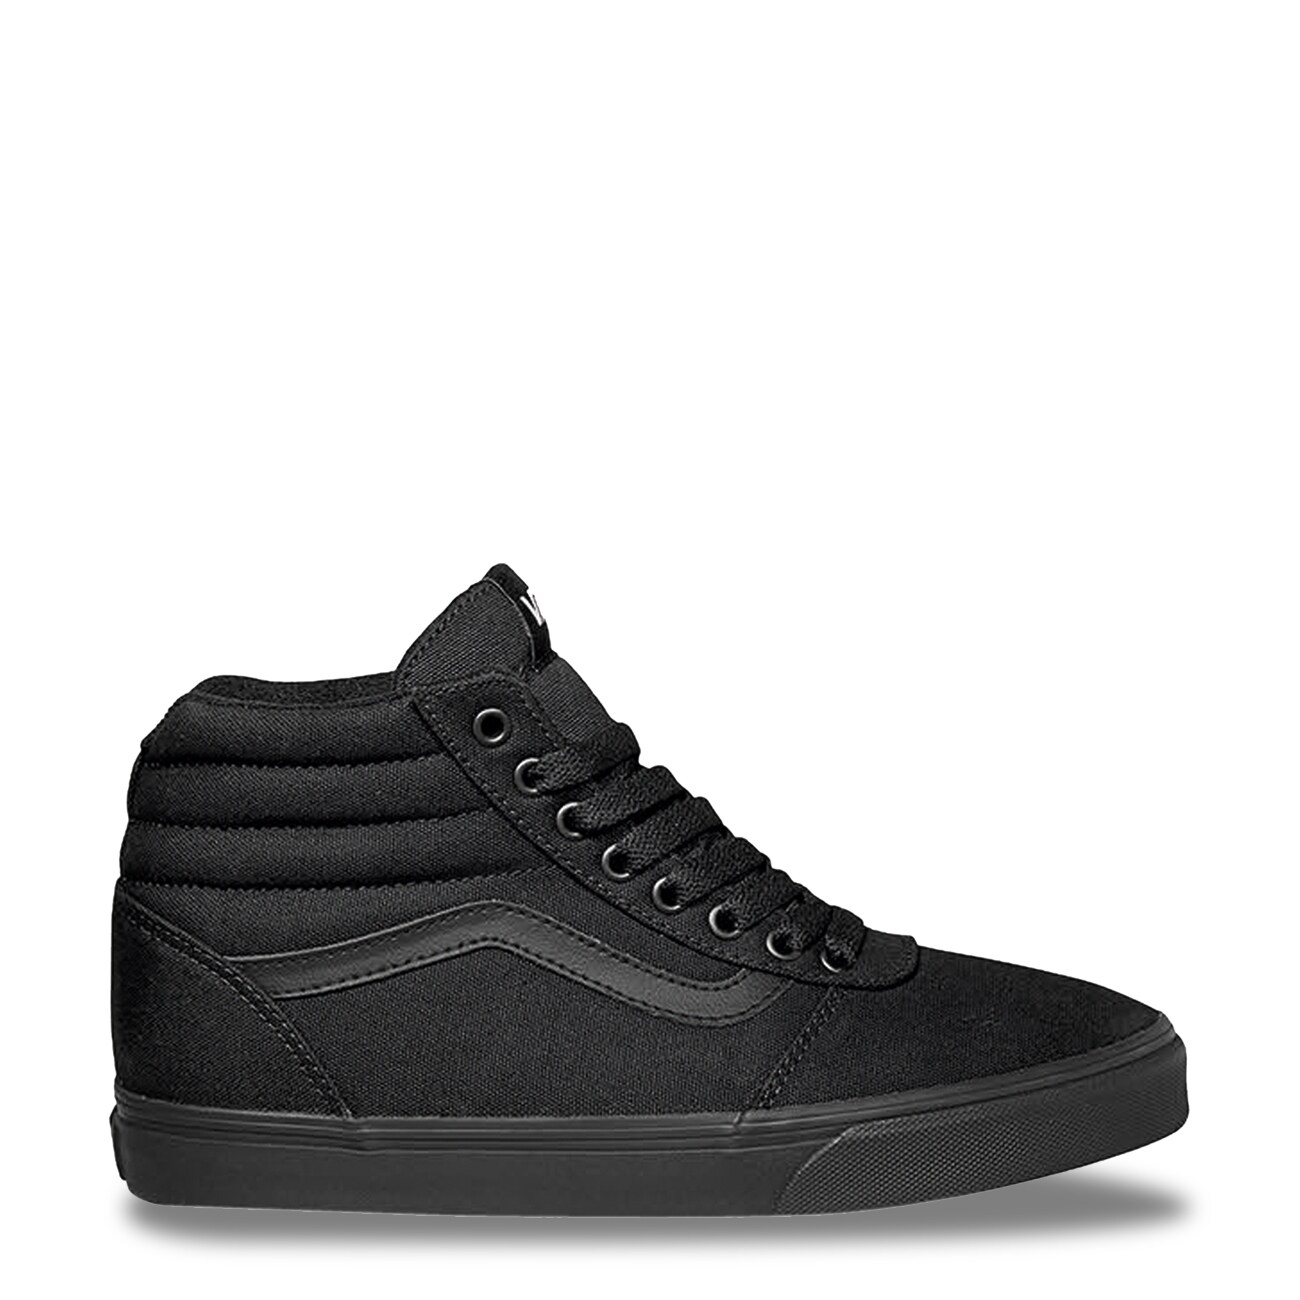 mens black and white high top vans